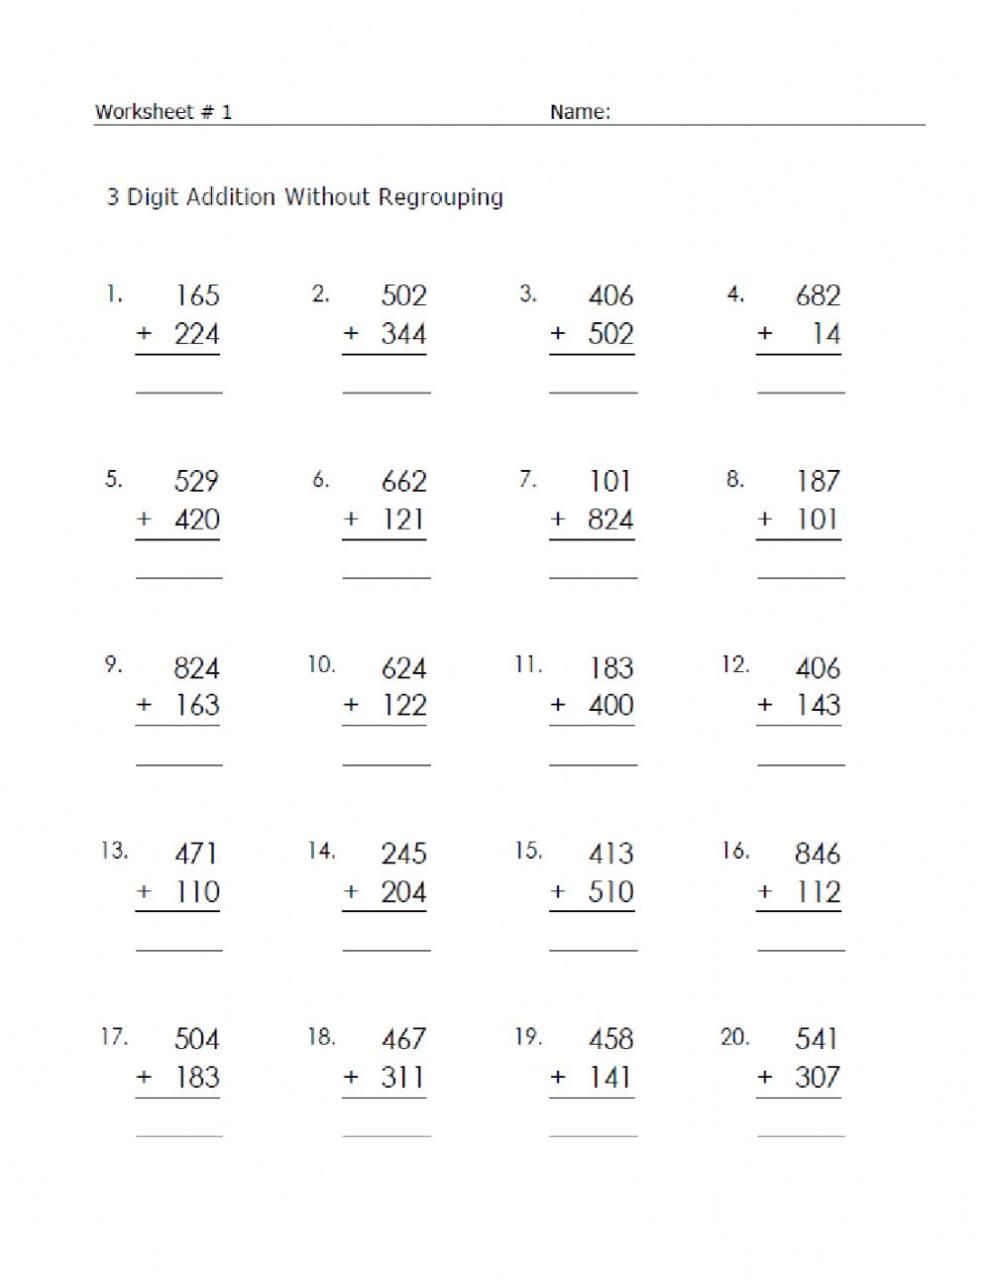 Addition interactive exercise for Class 2 , Grade 3